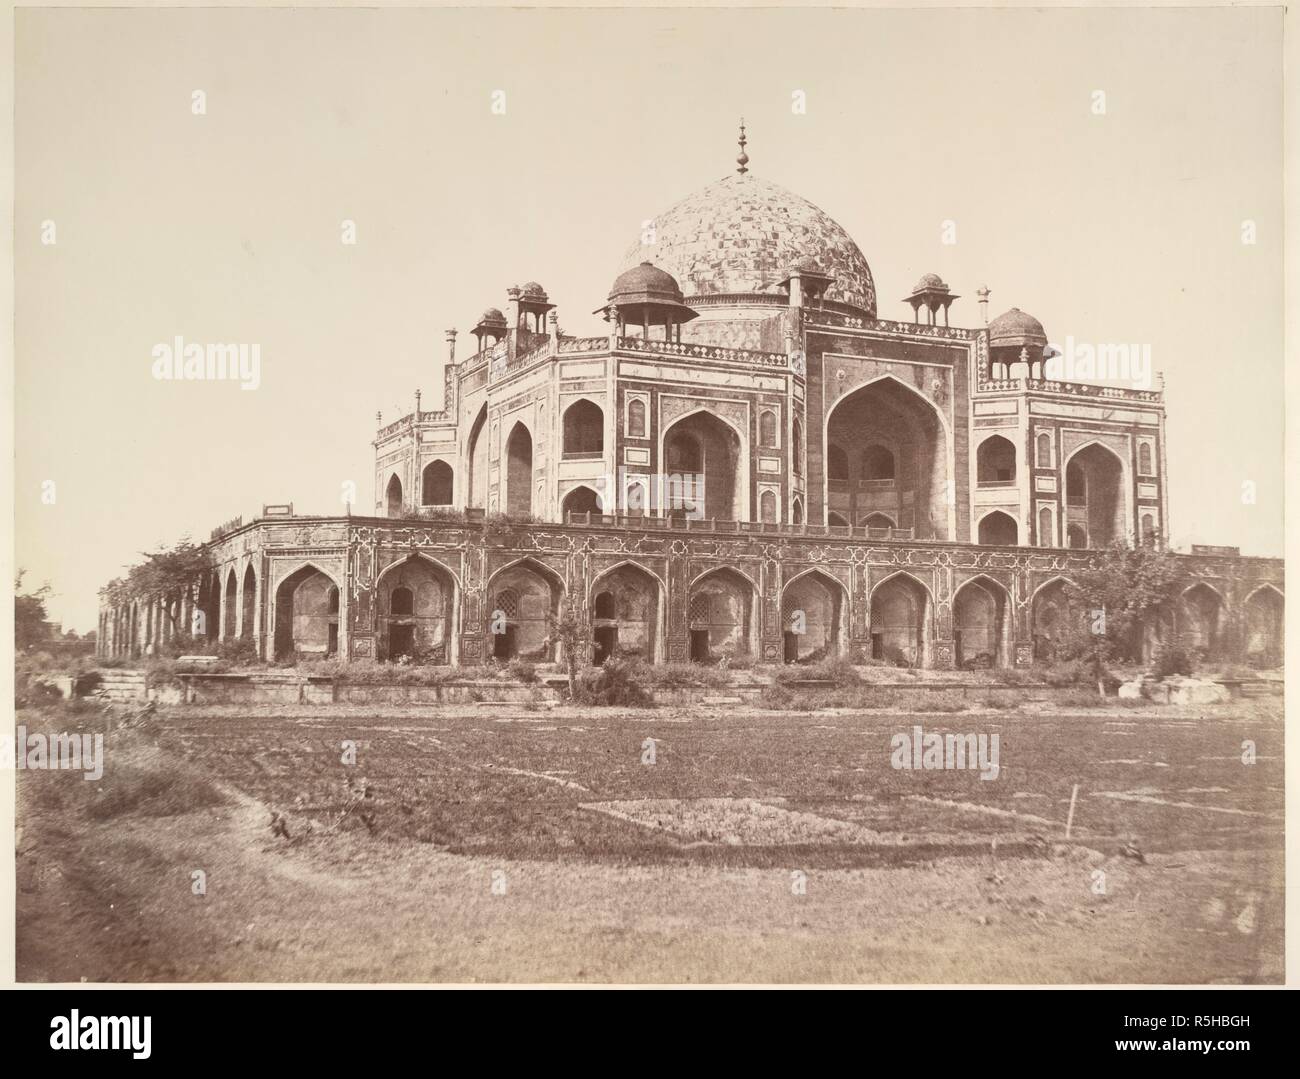 The Divan Khass [Diwan-i-Khas], Delhi. A general view from the west of the Diwan-i-Khas or Hall of Private Audience, with its arcade of five cusped arches facing the courtyard. Tytler Collection: Views of India by Robert and Harriet Tytler. 1858. Photograph. Source: Photo 53/(18). Stock Photo